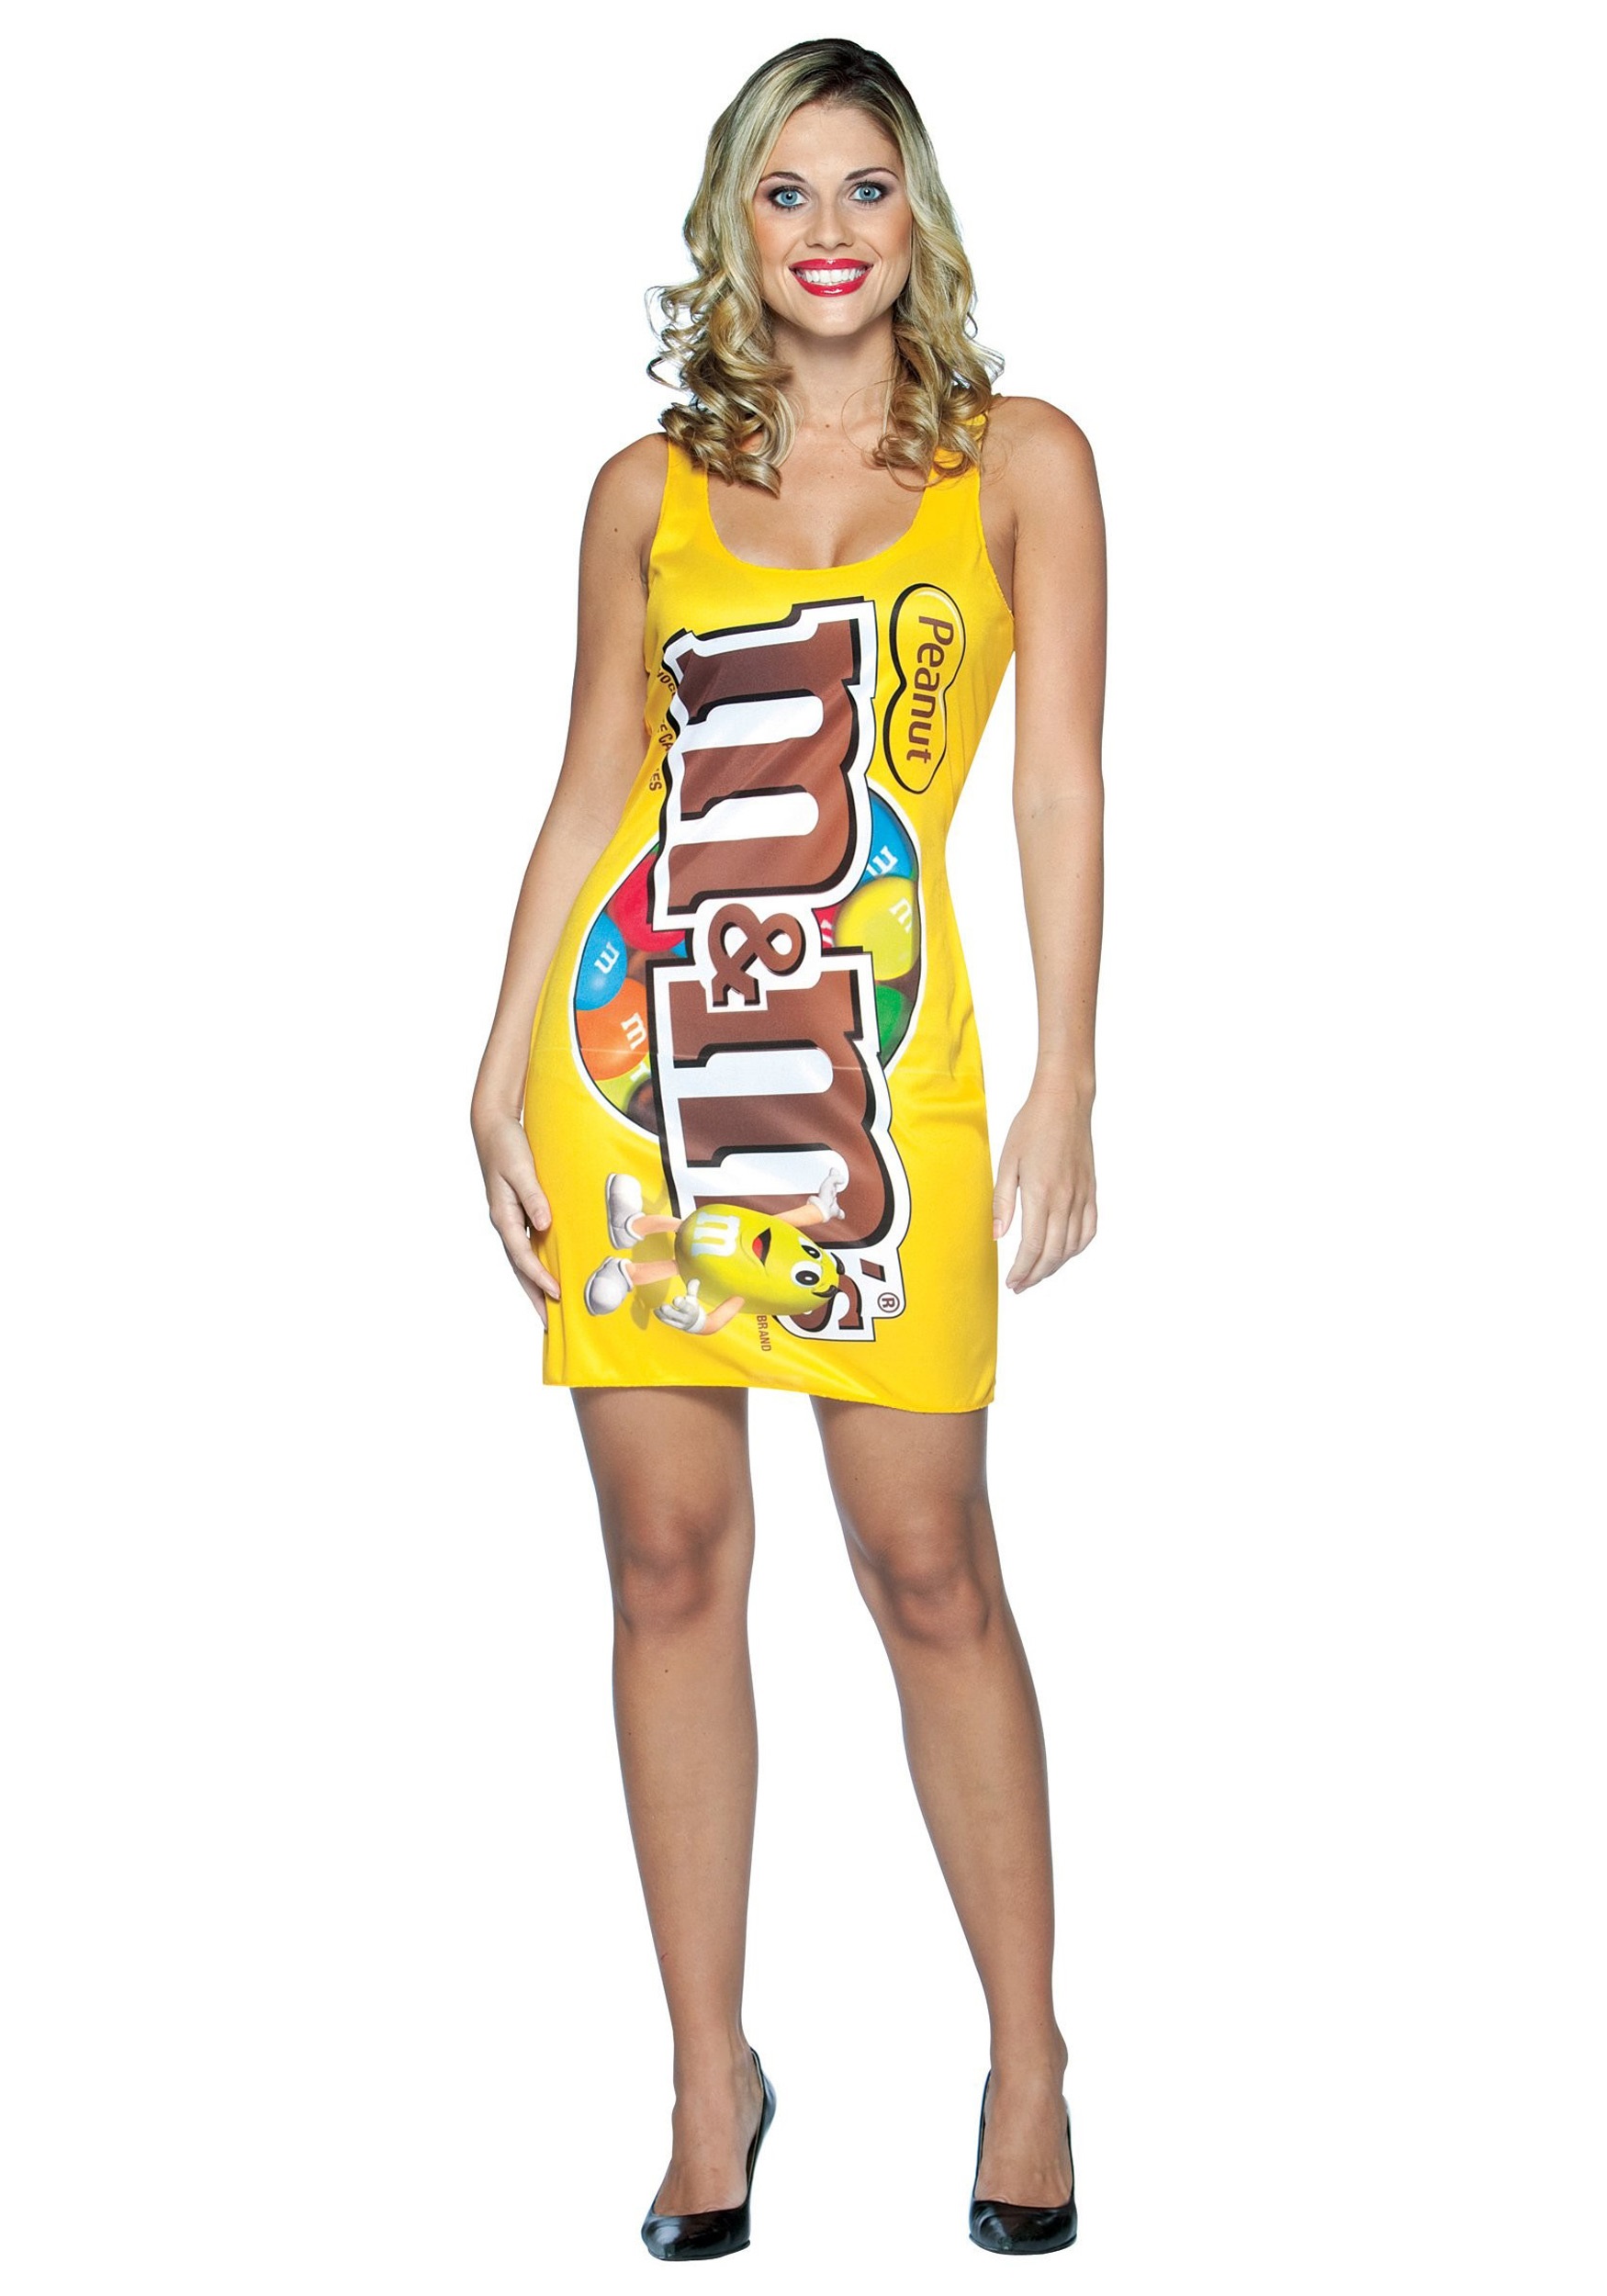 Adult Peanut M and M Purse - Unisex Costume Accessory for Adults